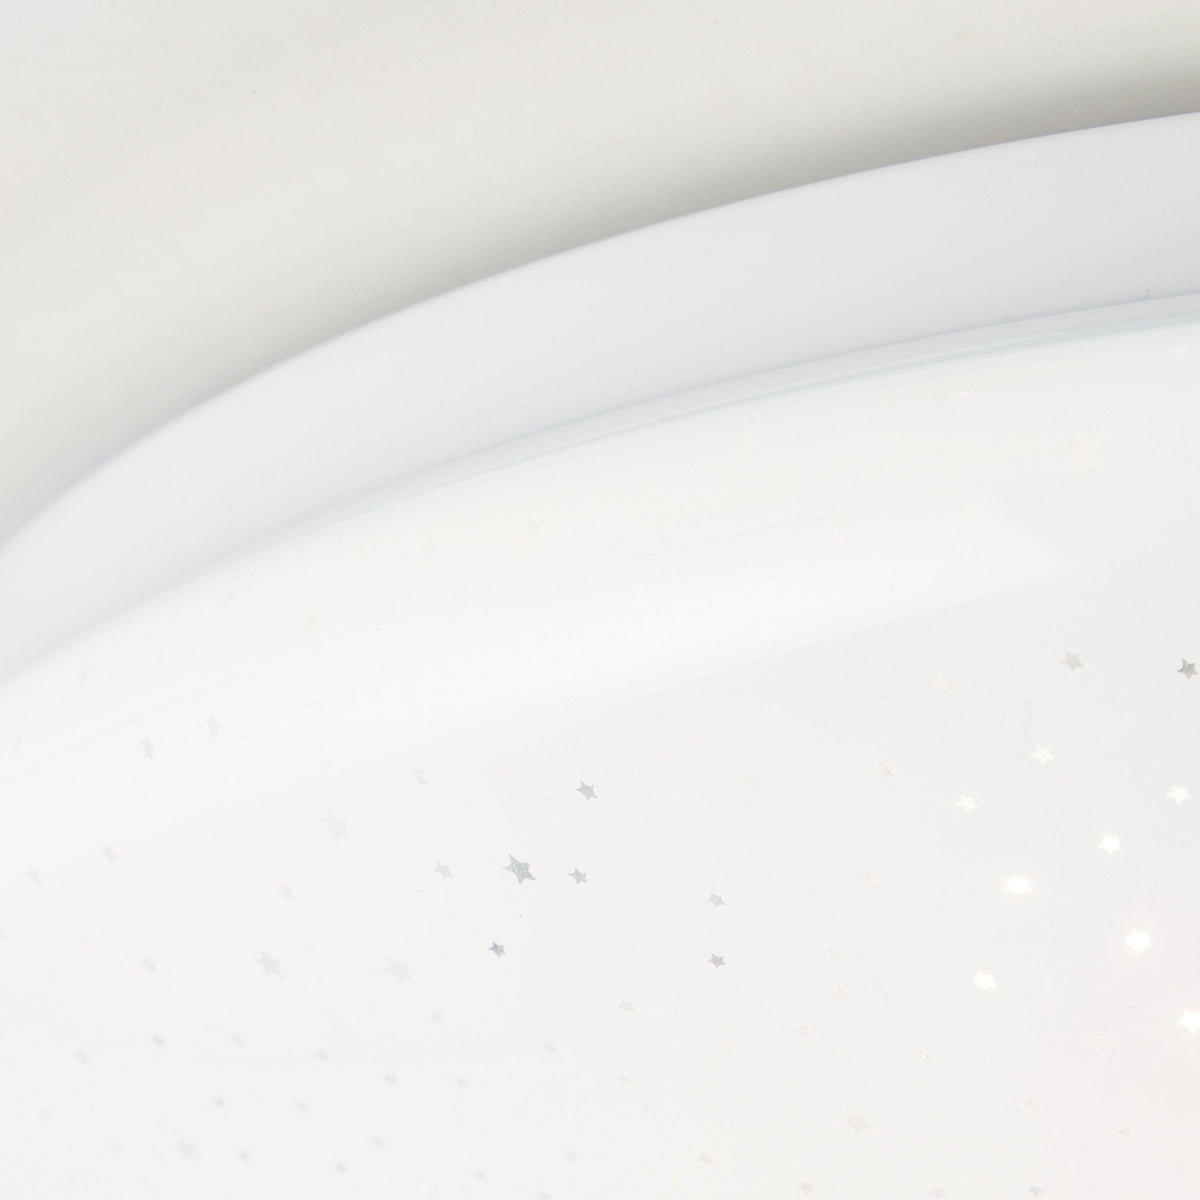 Brilliant 1 Light 12W Fakir Starry LED Wall &amp; Ceiling Light - White &amp; Cold White | G96974/05 from DID Electrical - guaranteed Irish, guaranteed quality service. (6977607827644)